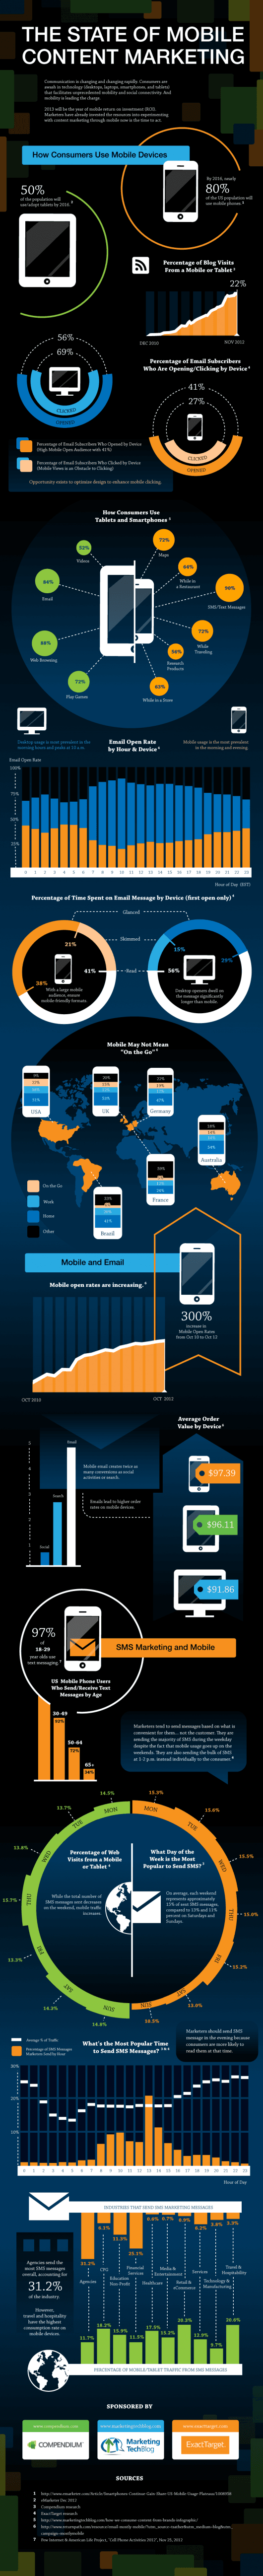 Mobile-Content-Marketing-Infographic